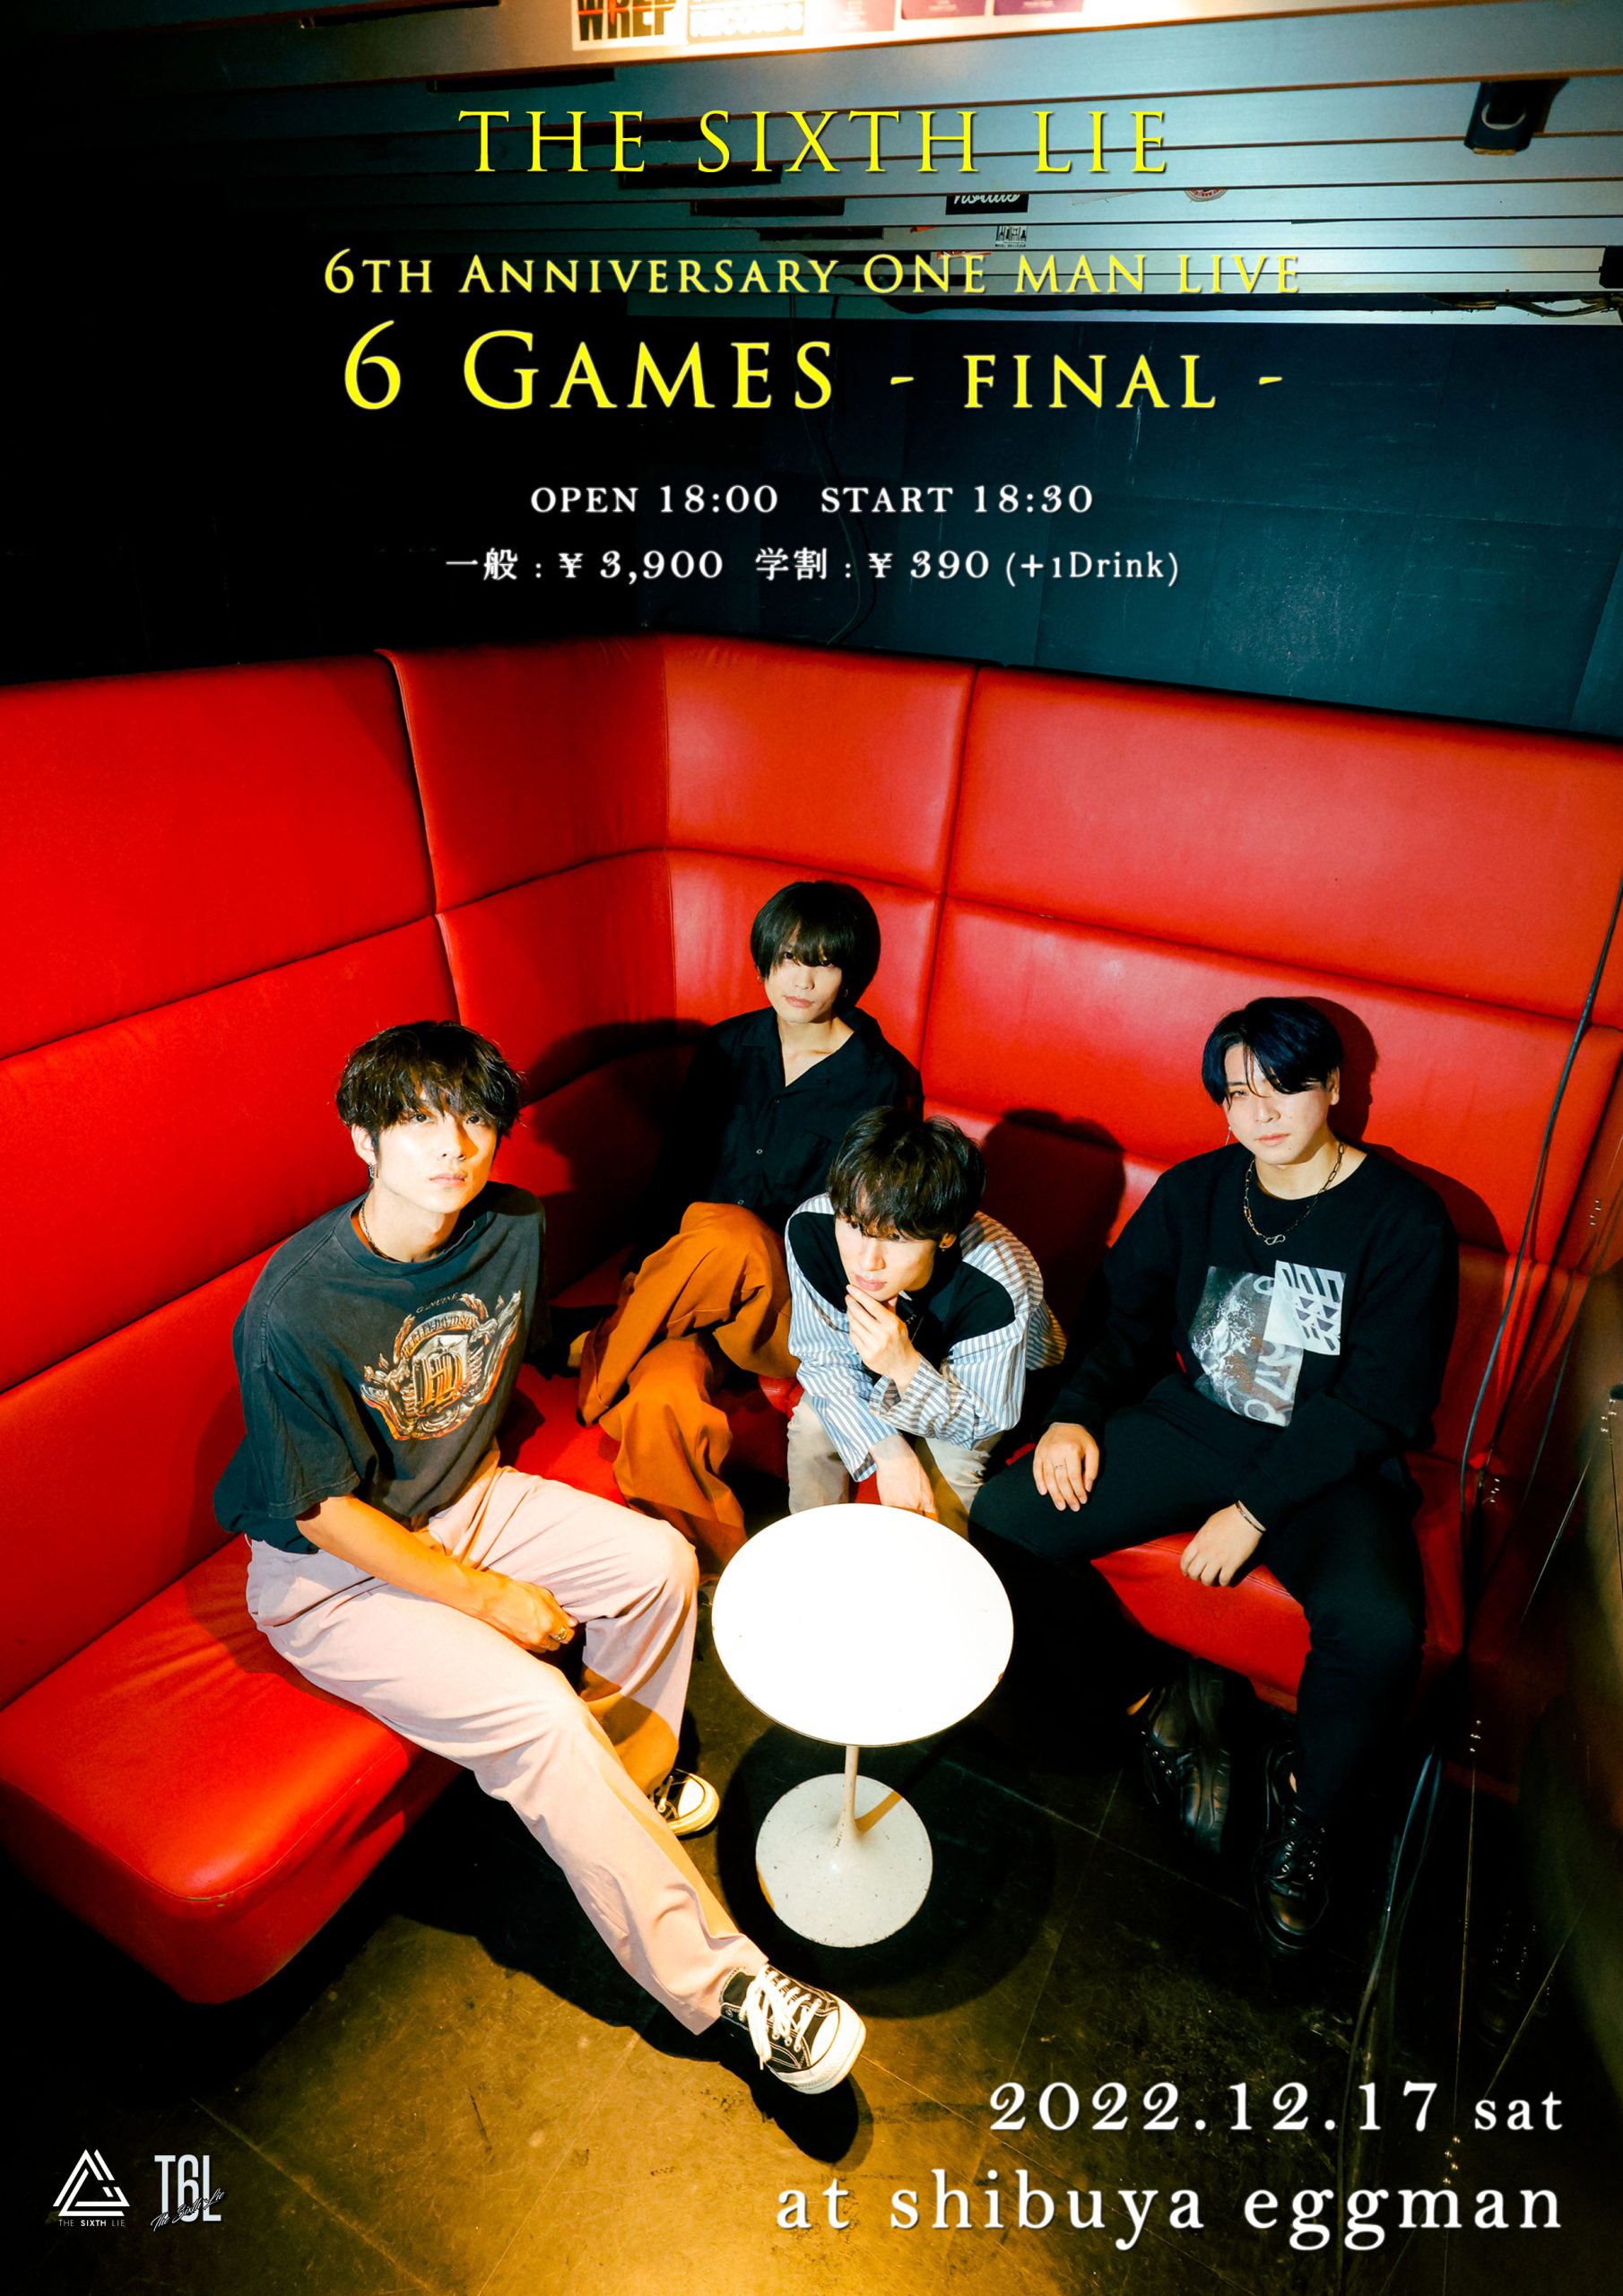 THE SIXTH LIE 6th Anniversary ONE MAN LIVE「6 Games -final-」